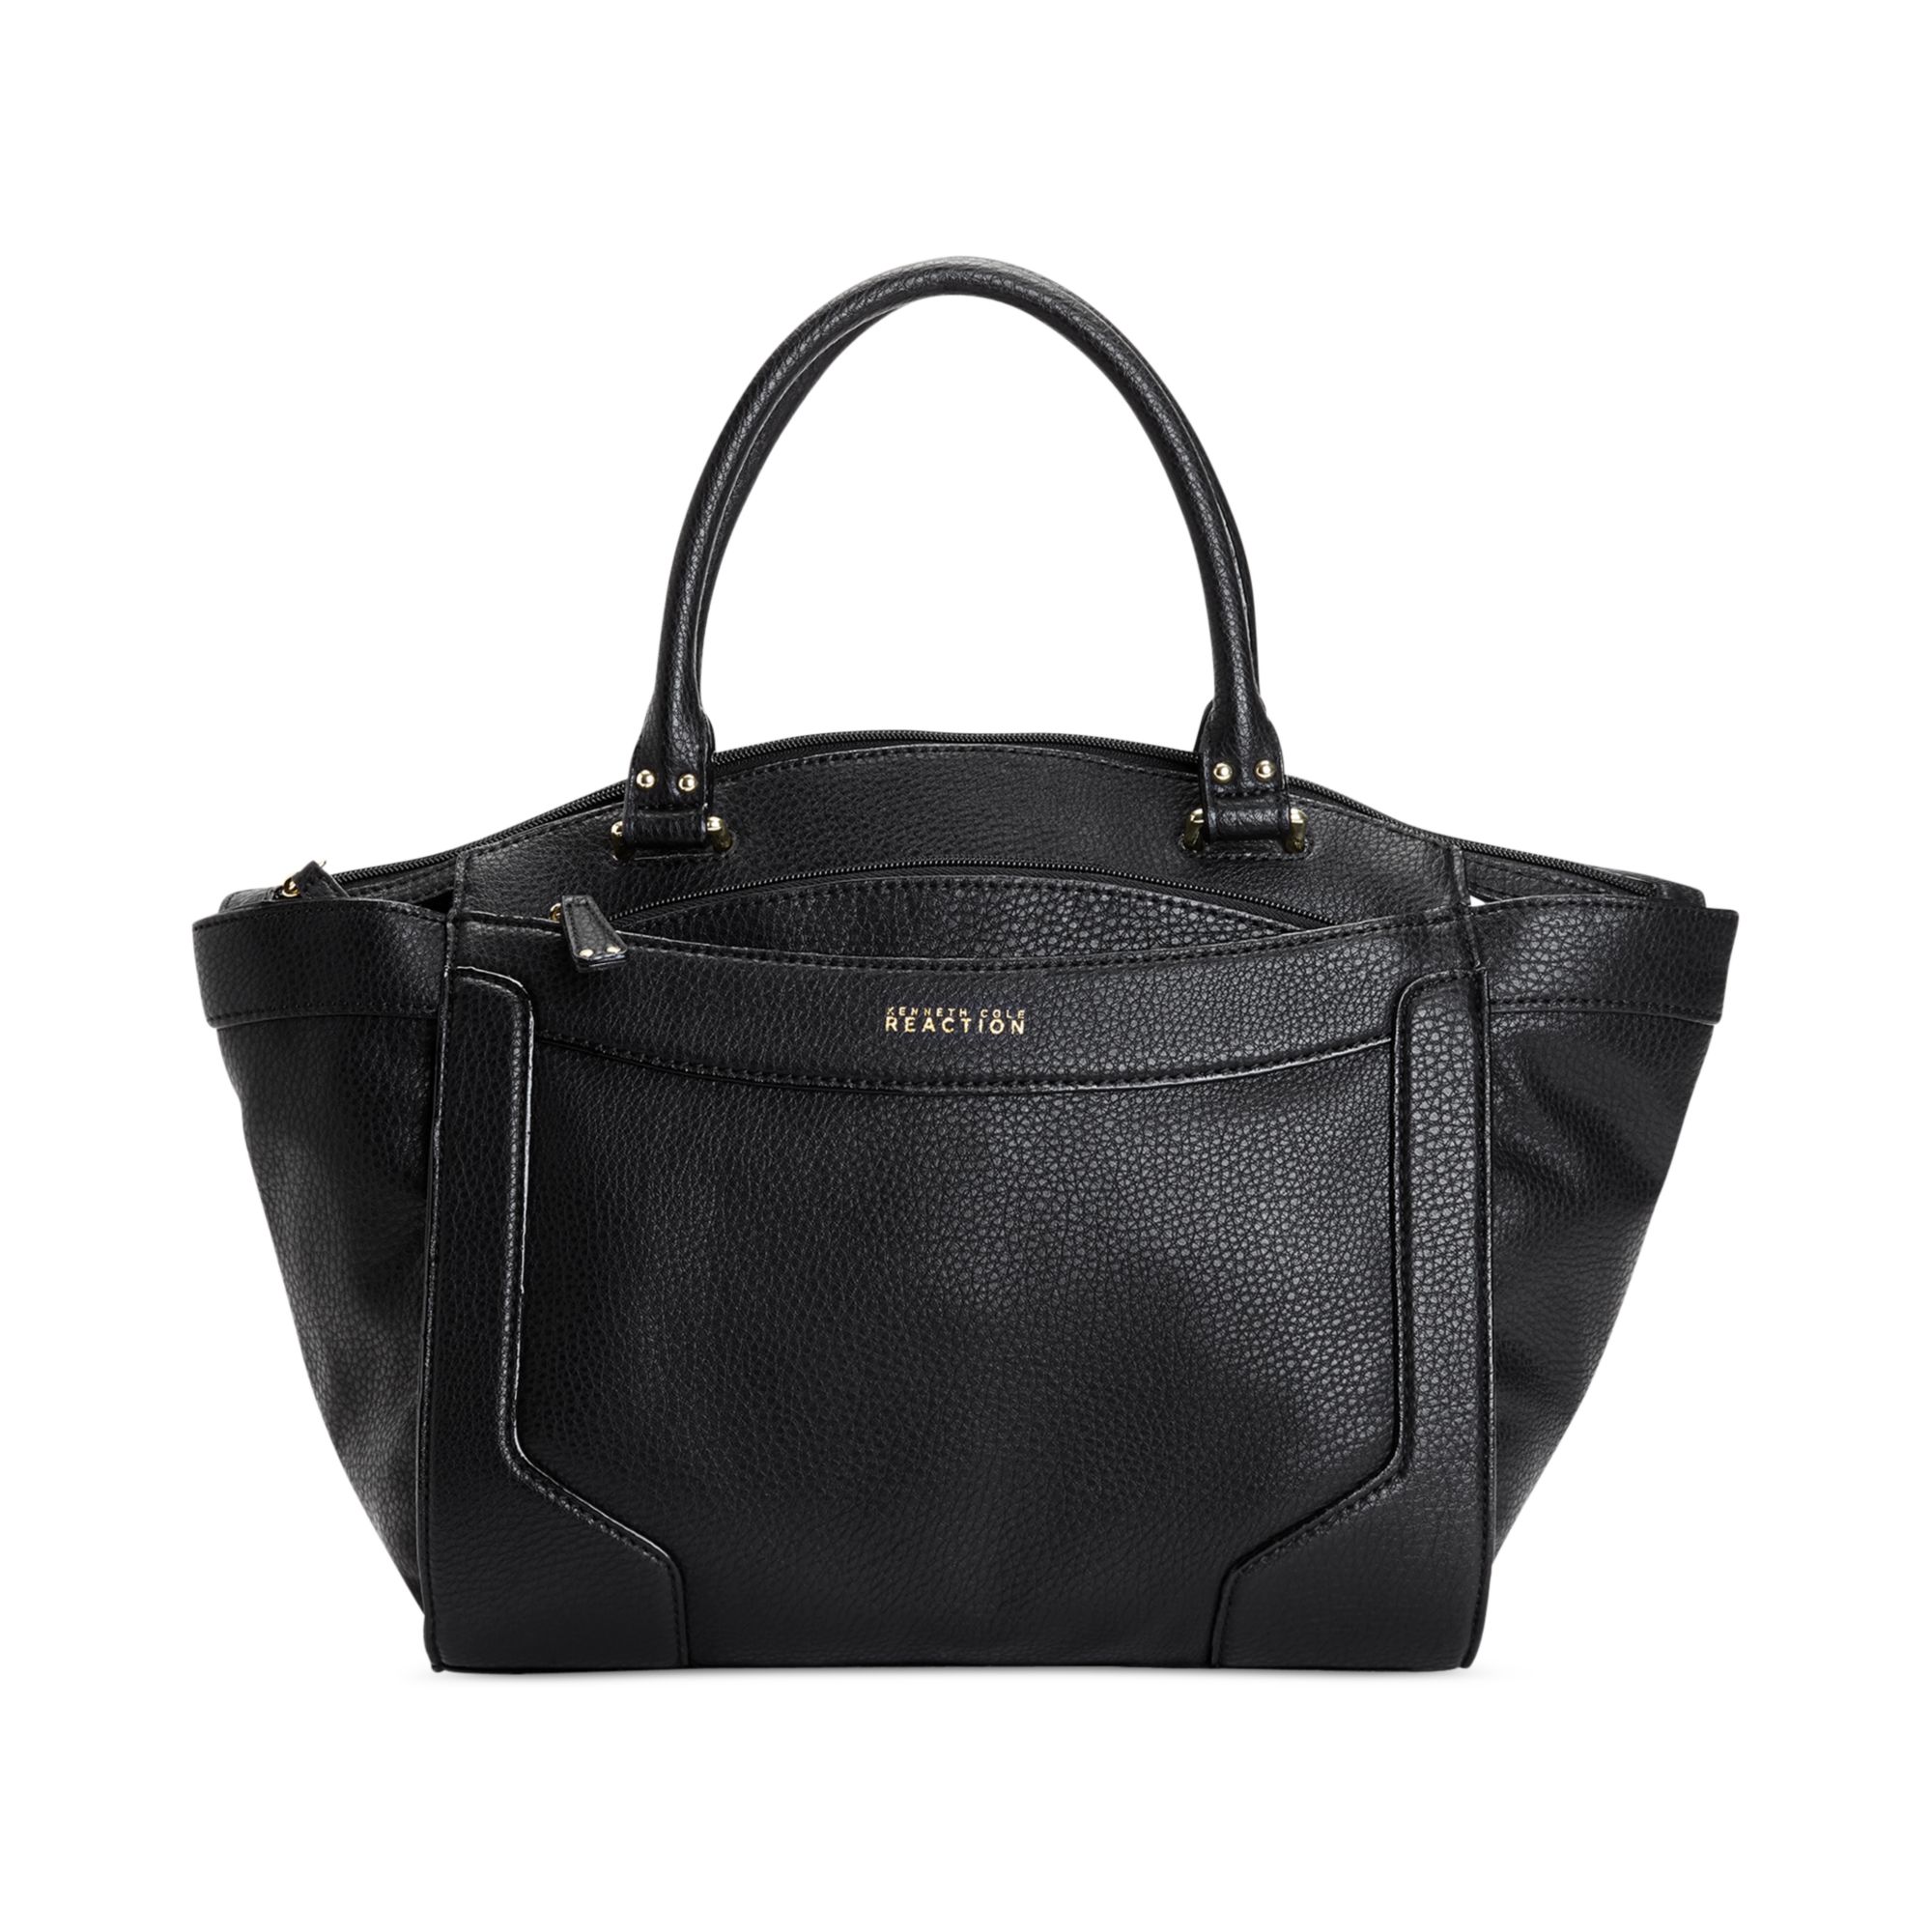 Kenneth Cole Reaction Fair and Square Satchel in Black | Lyst